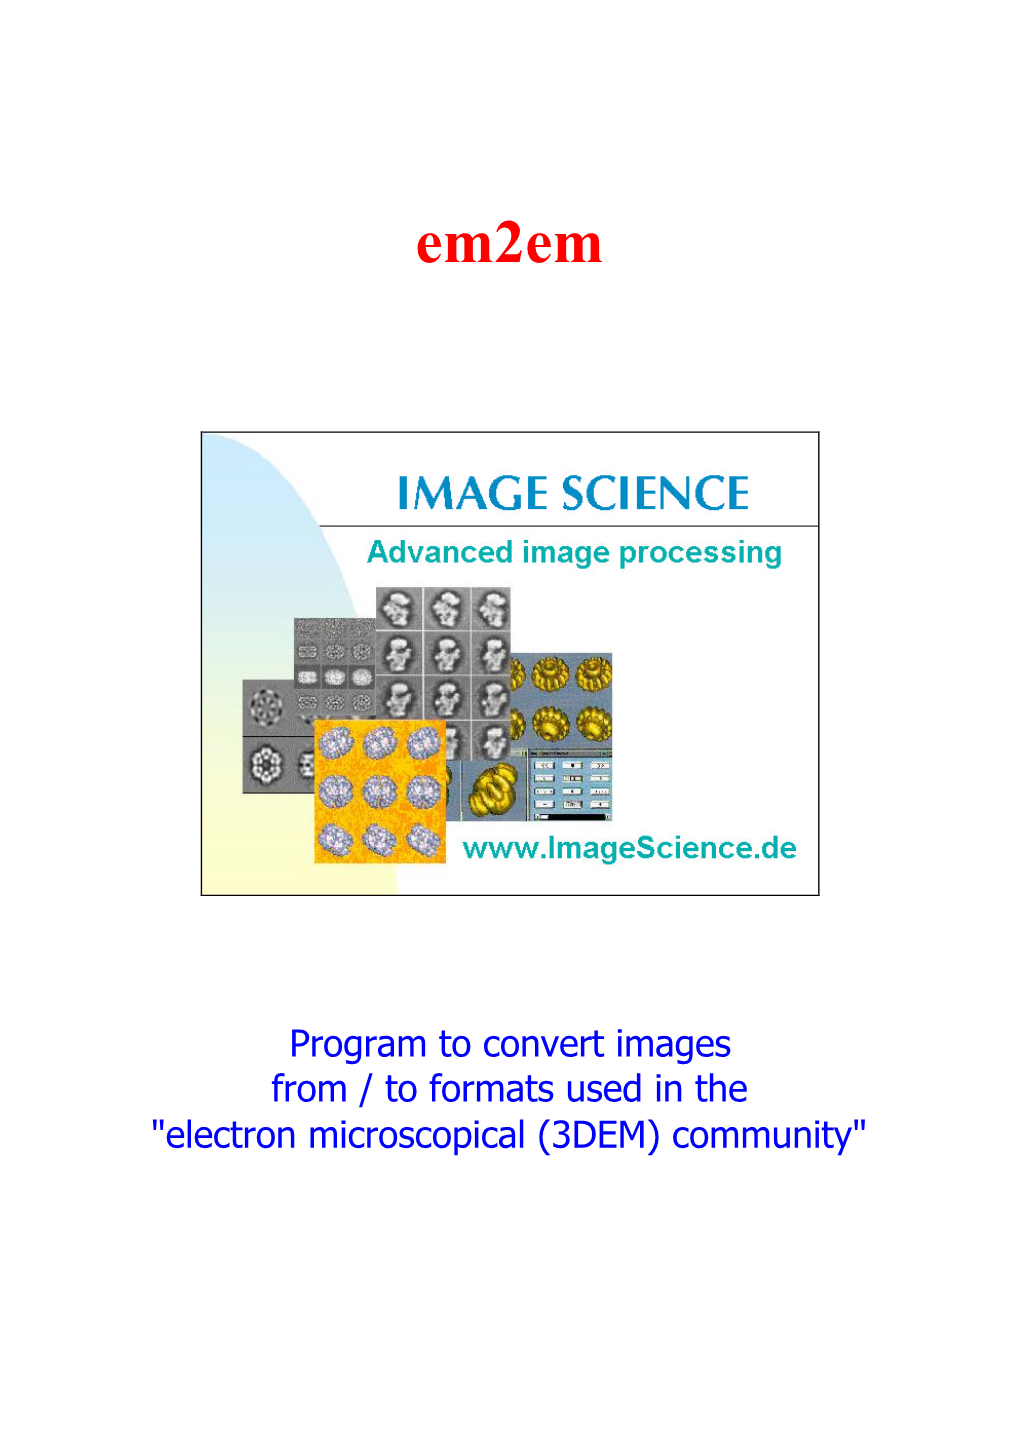 Program to Convert Images from / to Formats Used in the "Electron Microscopical (3DEM) Community"